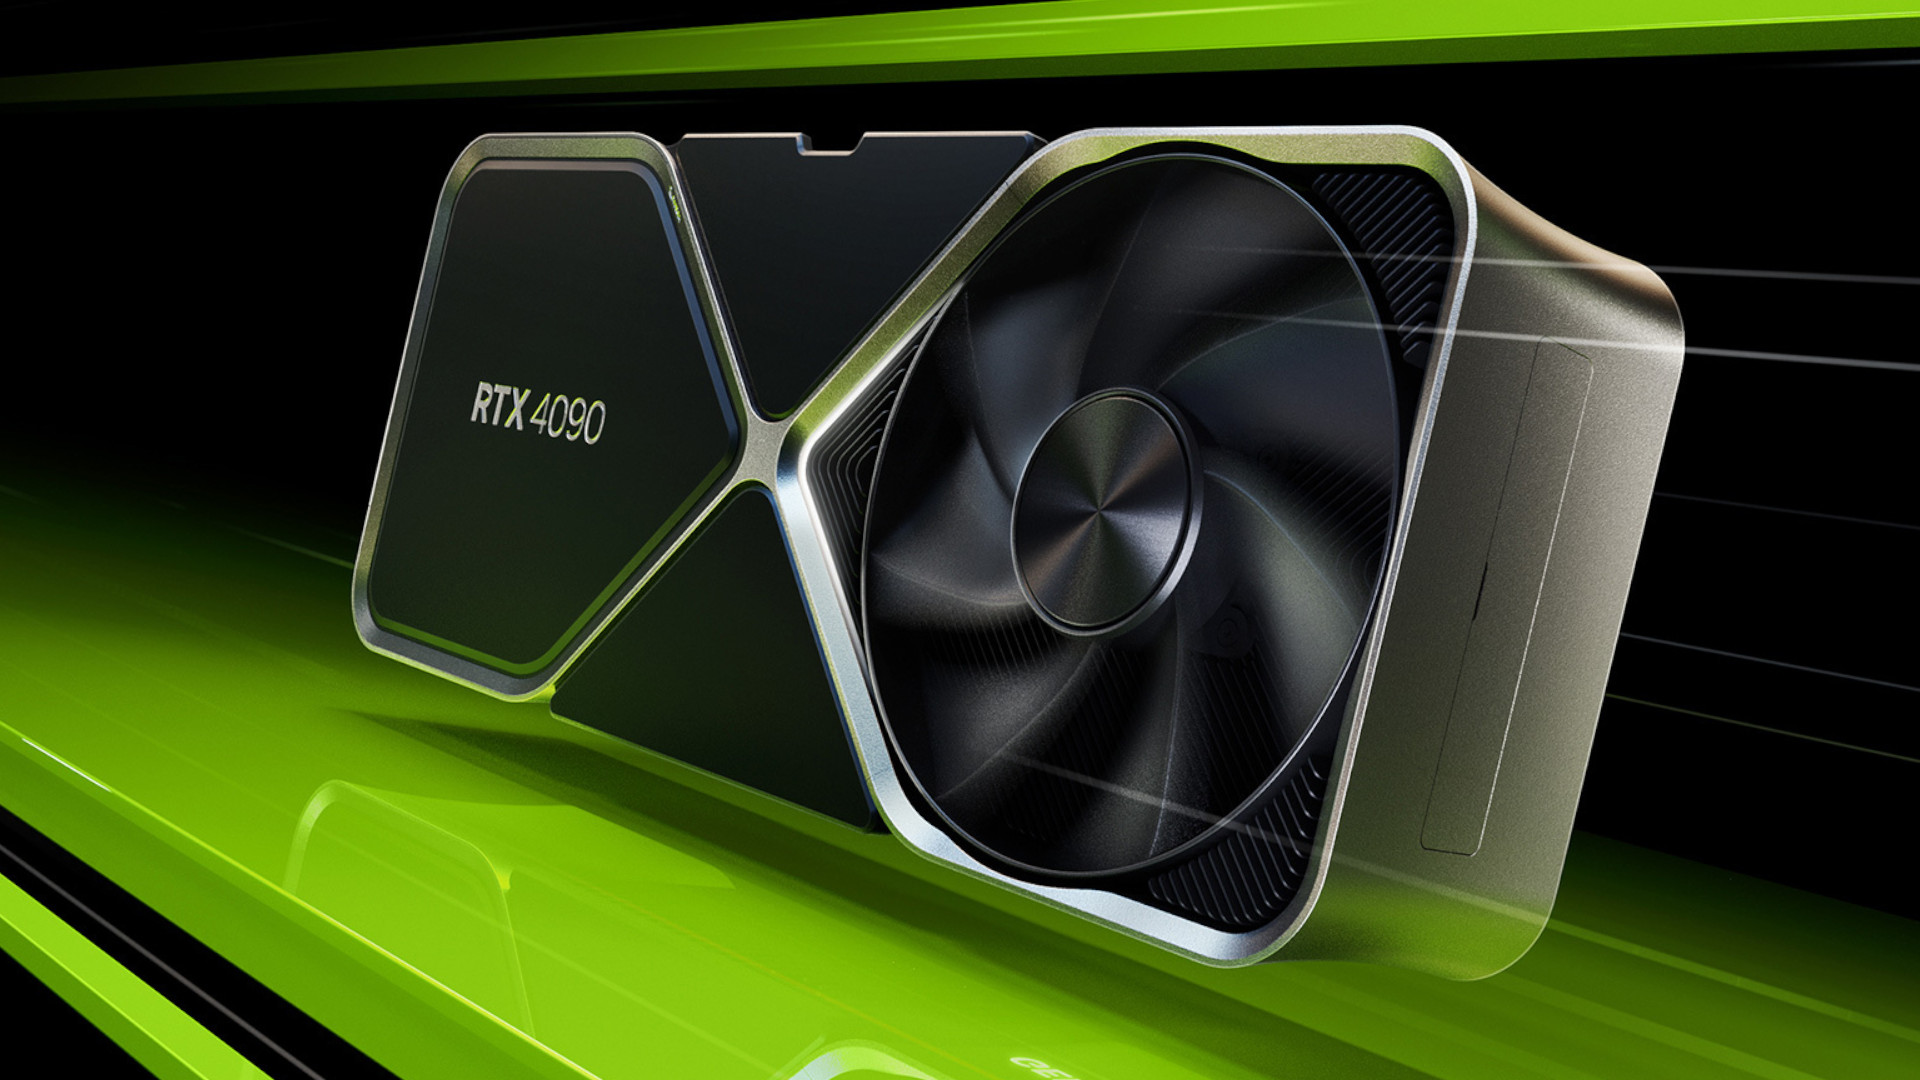 Nvidia GeForce RTX 4090 graphics card against a black background with green stripes